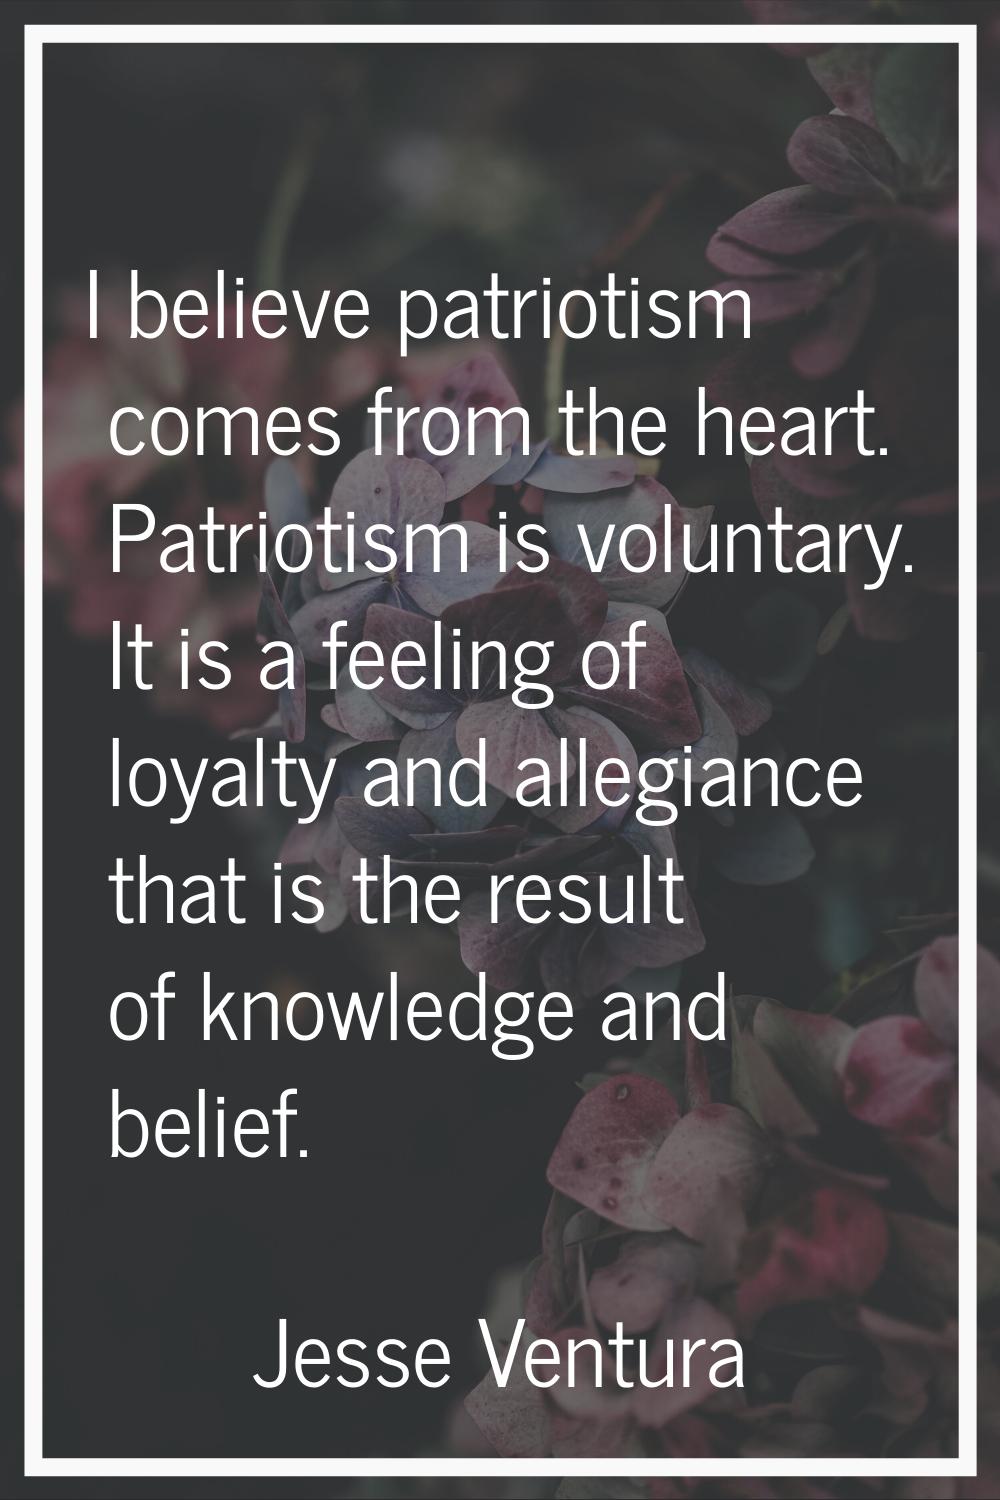 I believe patriotism comes from the heart. Patriotism is voluntary. It is a feeling of loyalty and 